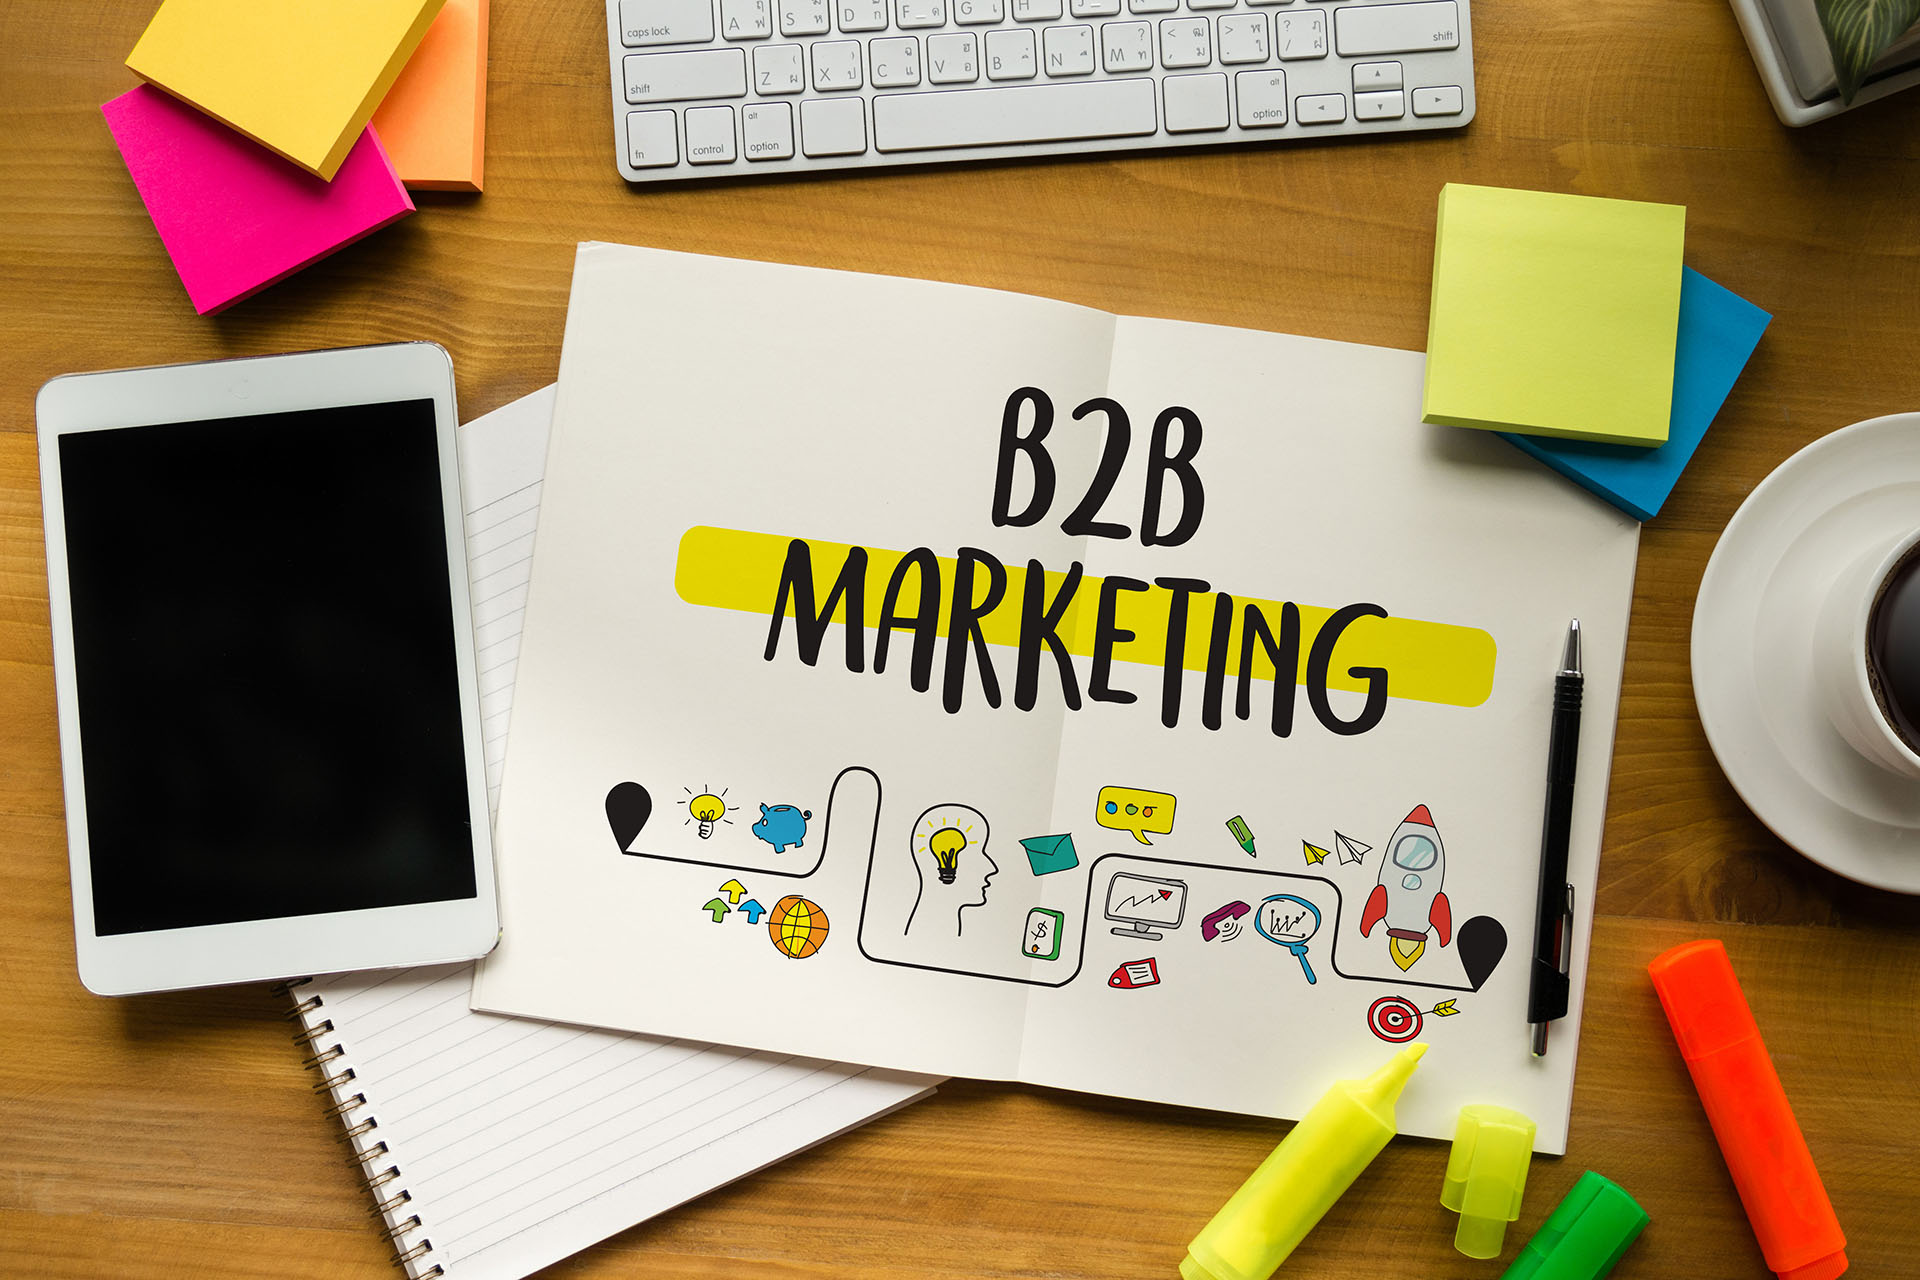 “B2B Marketing” on a paper with icons, surrounded by pens, highlighters, a notebook, and iPad, a coffee cup, sticky notes, and a keyboard.